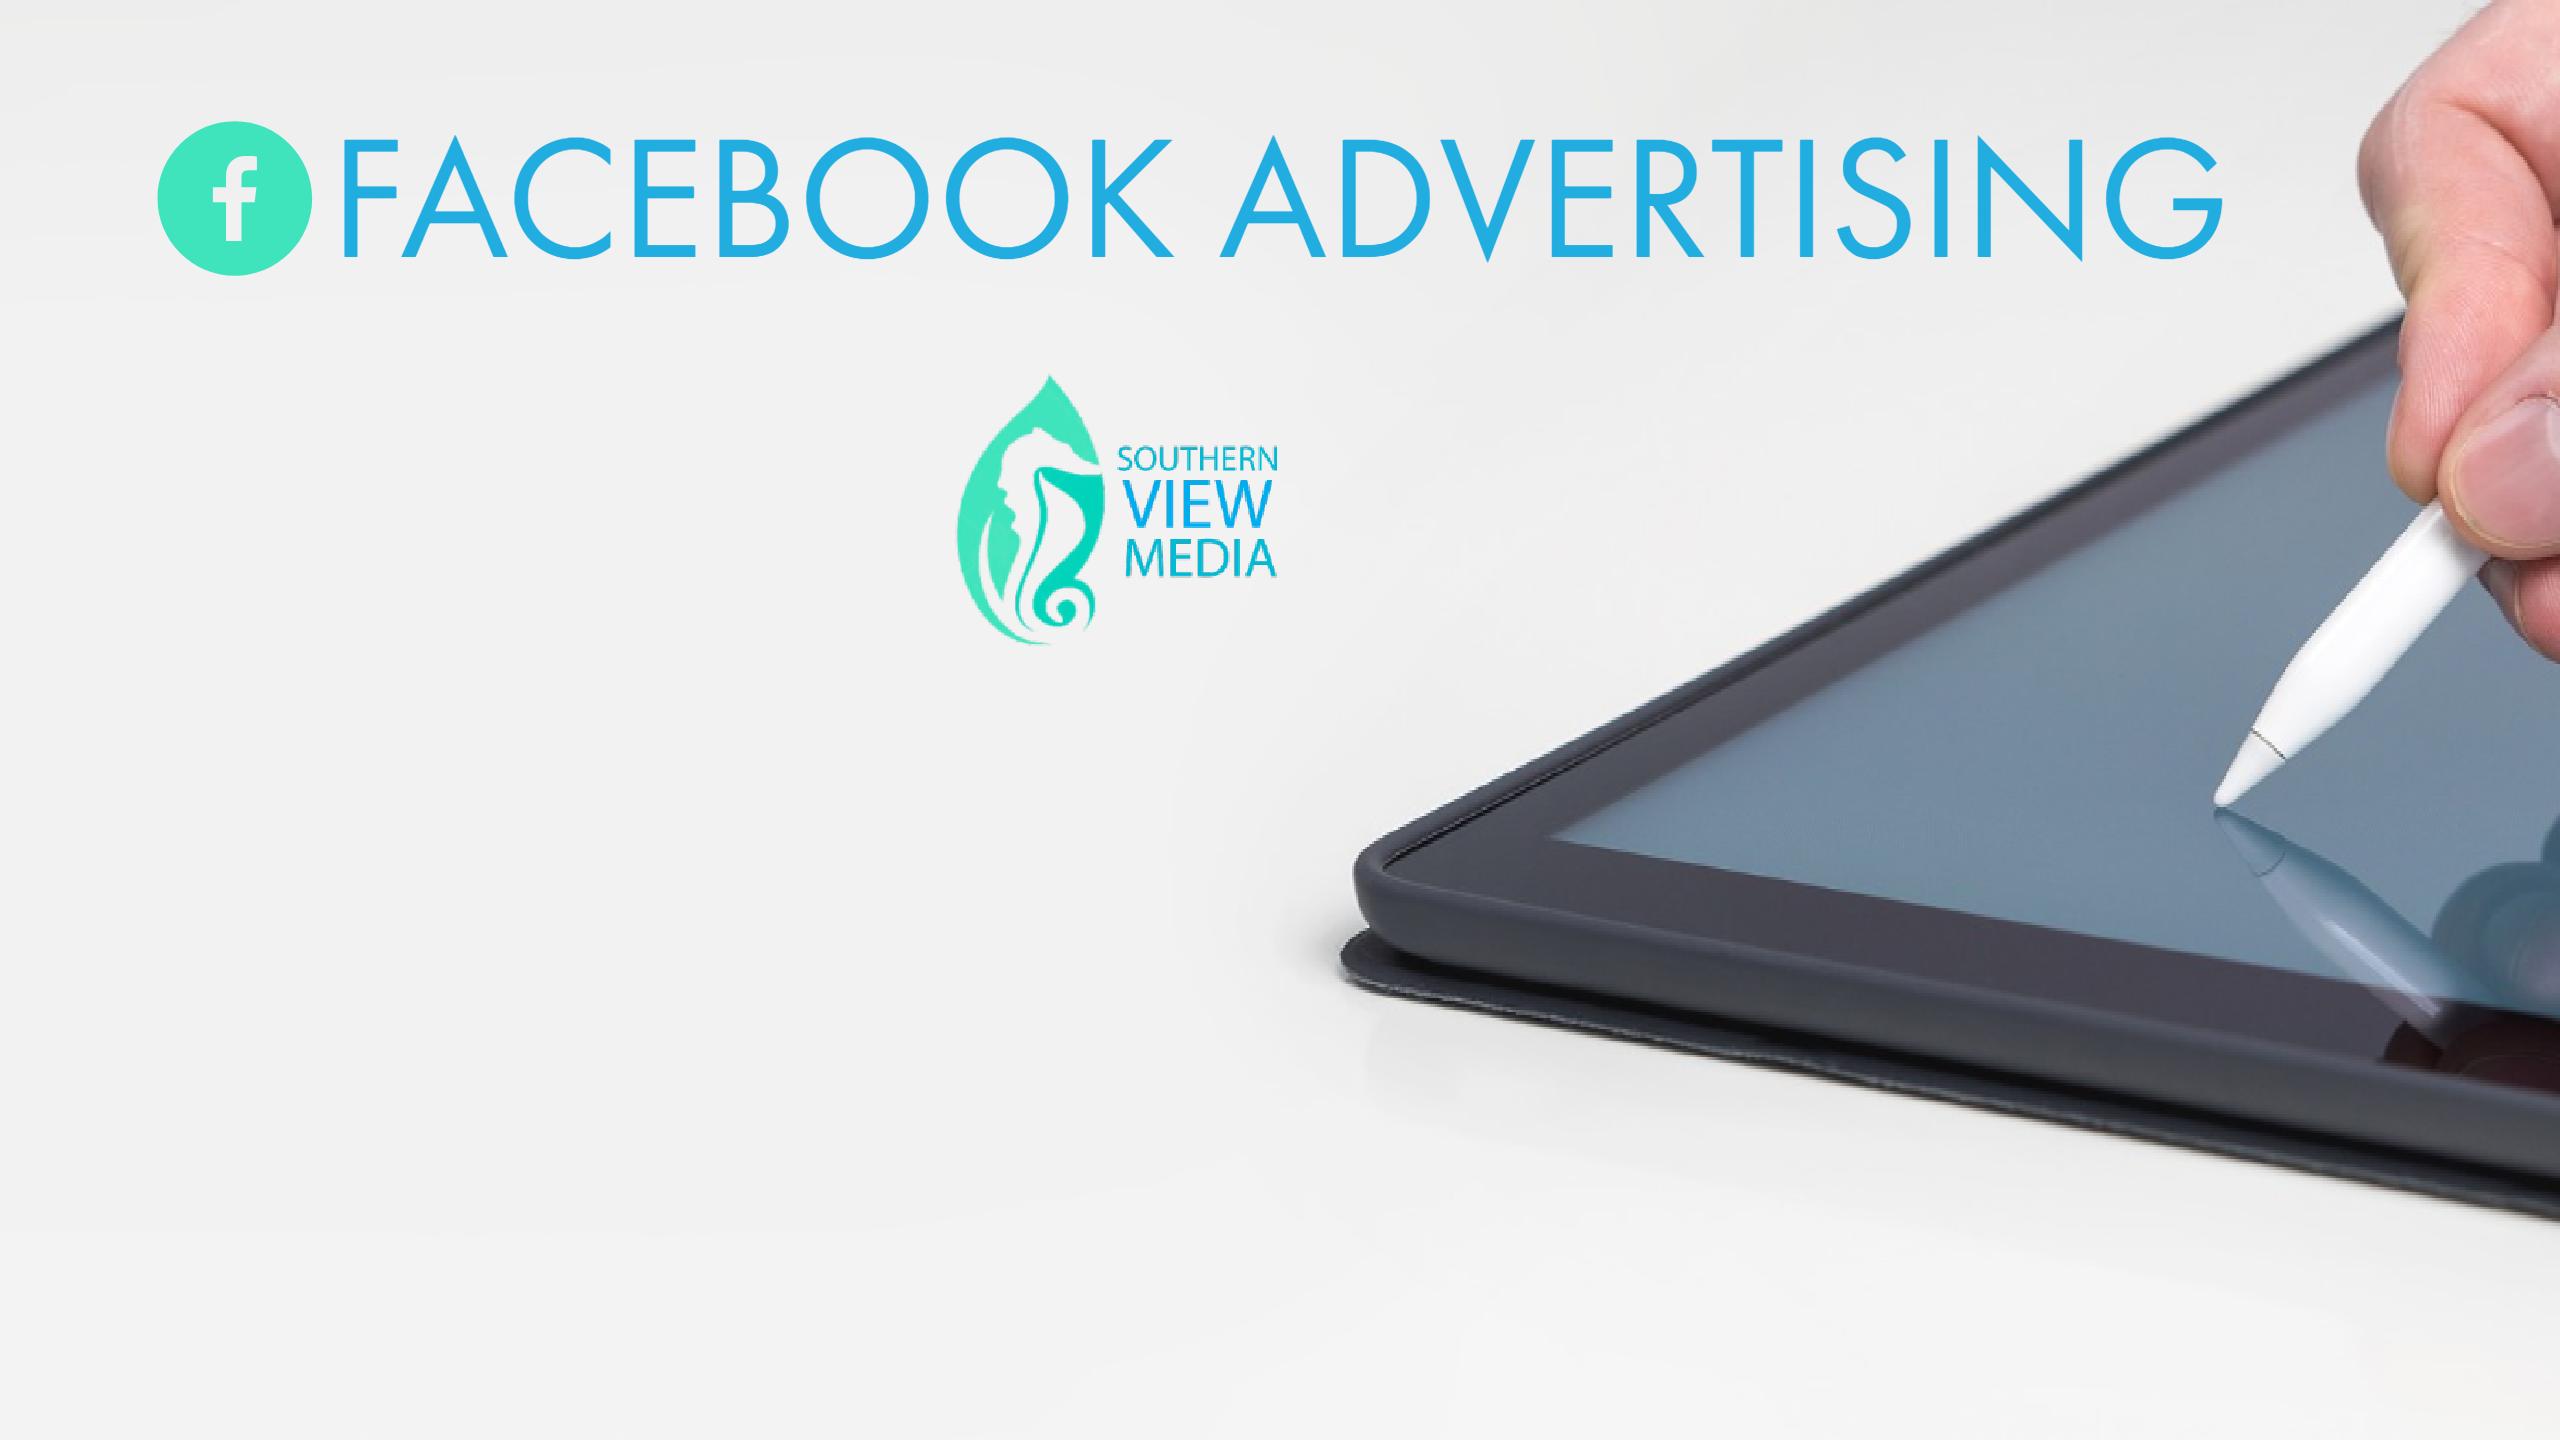 FACEBOOK ADVERTISING - Southern View Media - 